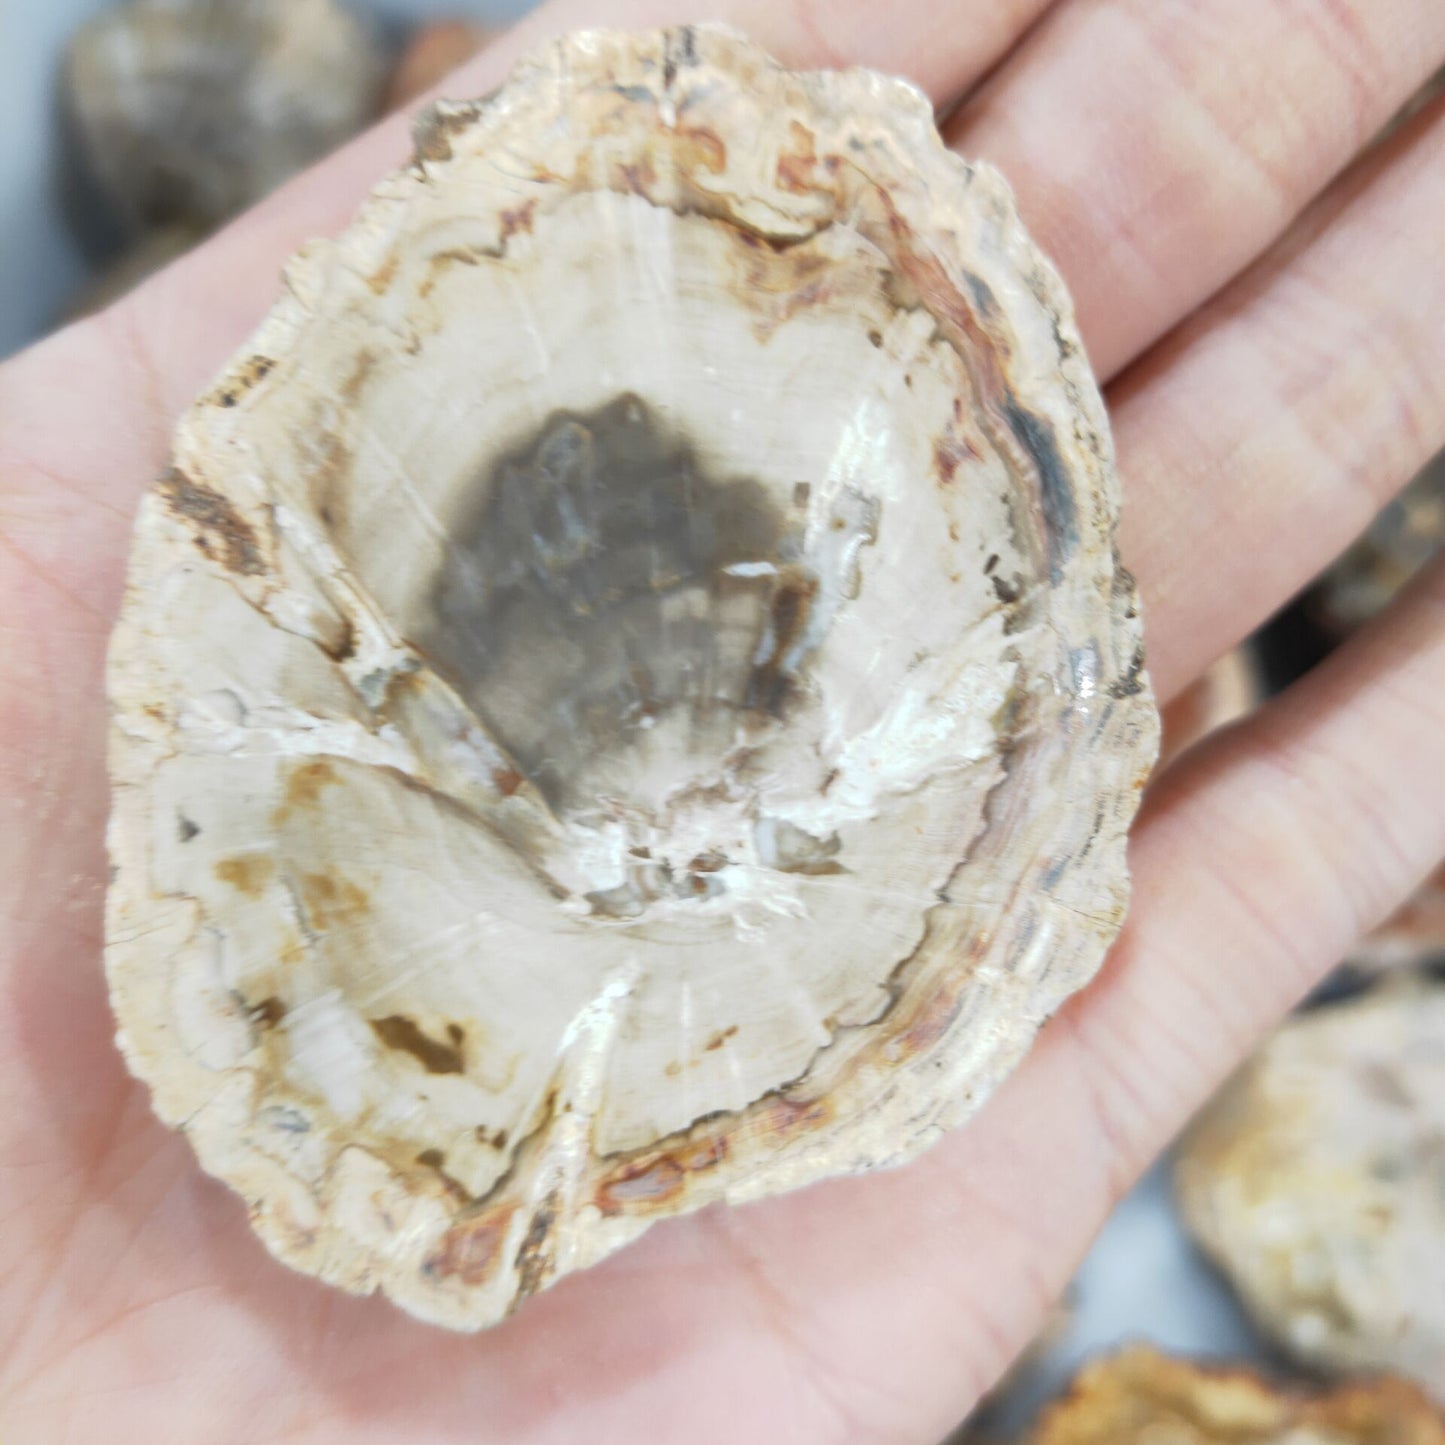 4-6cm natural crystal Petrified wood piece ore specimens for decorative collection